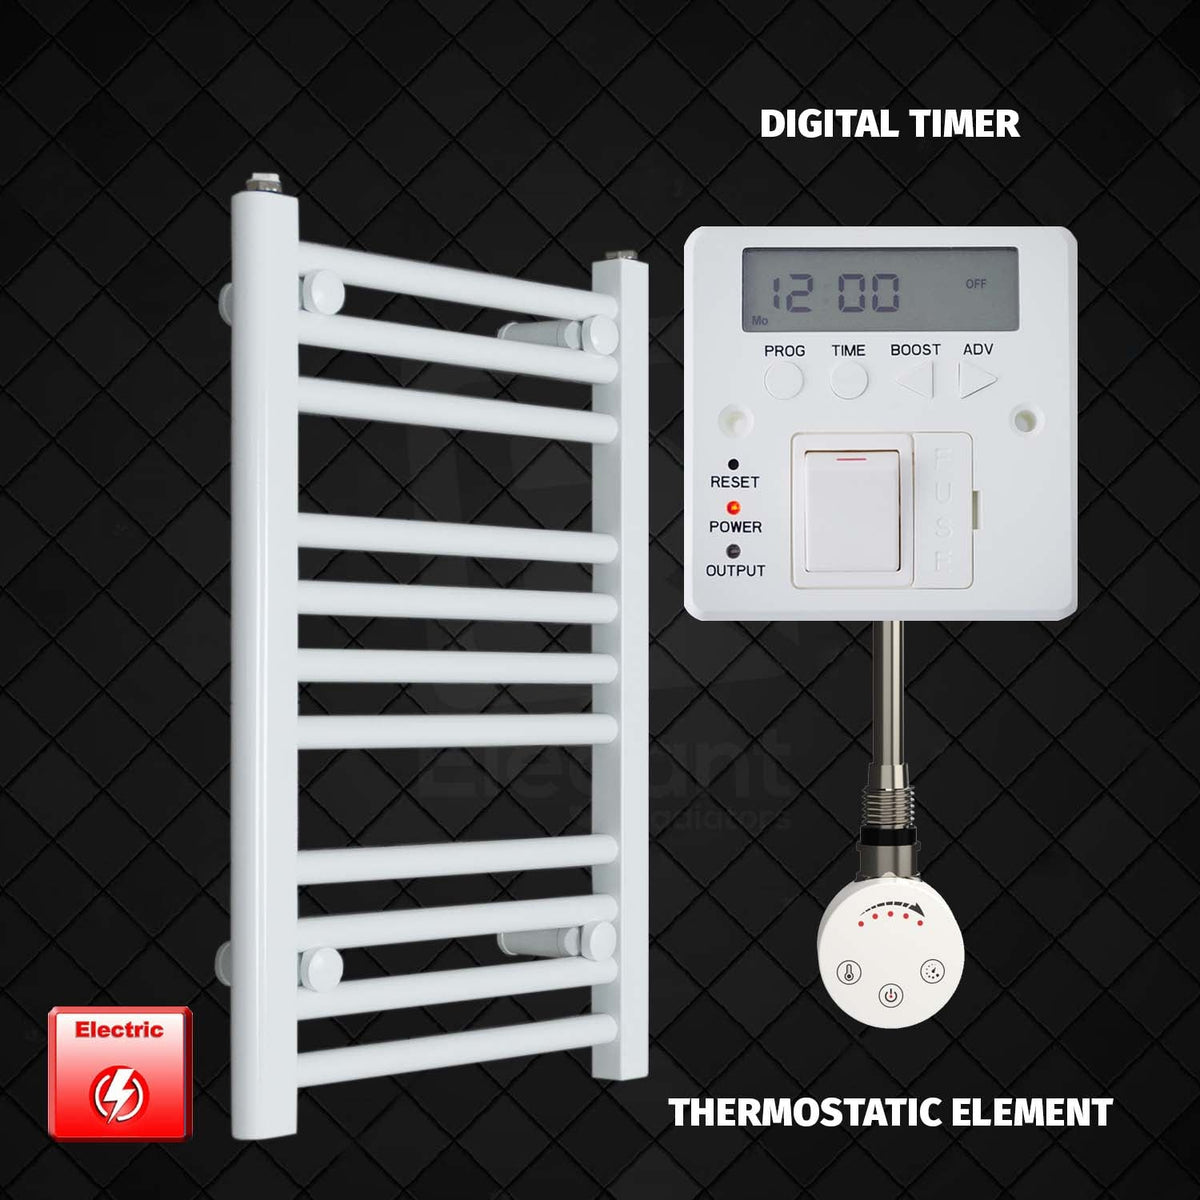 600 mm High 500 mm Wide Pre-Filled Electric Heated Towel Rail Radiator White HTR SMR Thermostatic element Digital timer